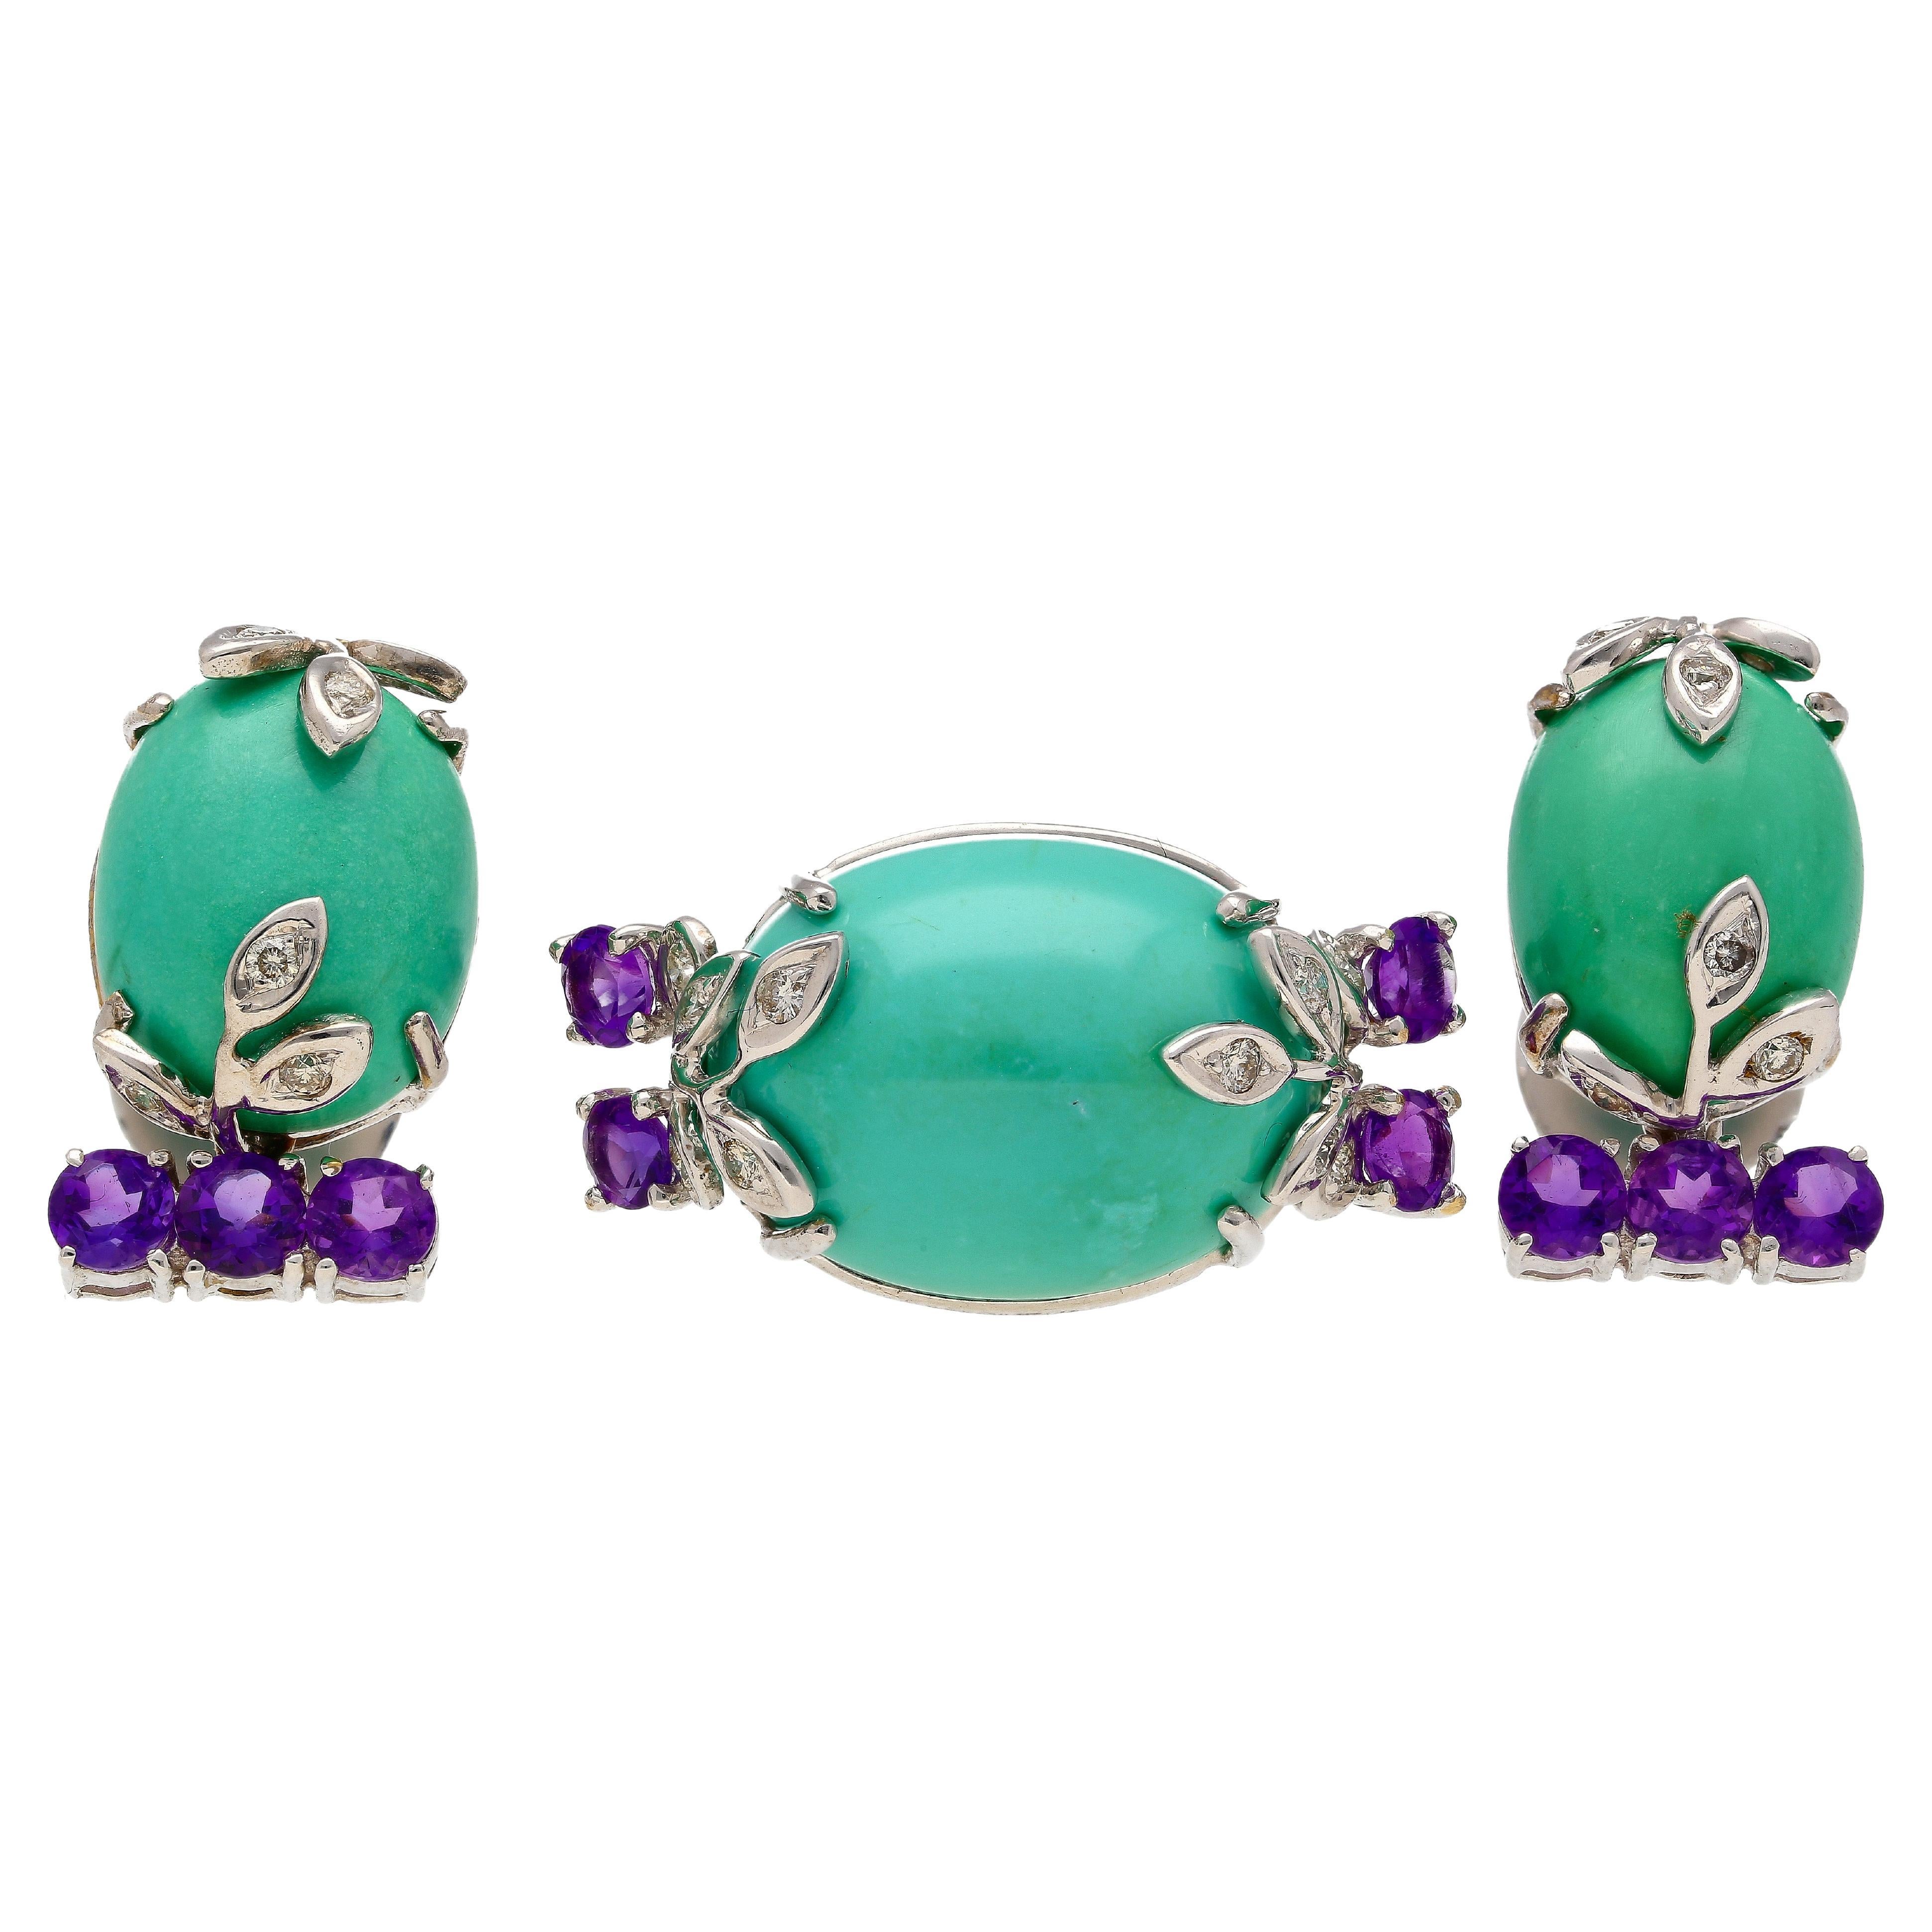 This Jewelry set is crafted from 18K White Gold. Each piece consists of amethyst, turquoise and diamonds. This set shares a floral theme and design.
The ring weighs 5.38 grams, and the prong setting secures the unique center stone turquoise,